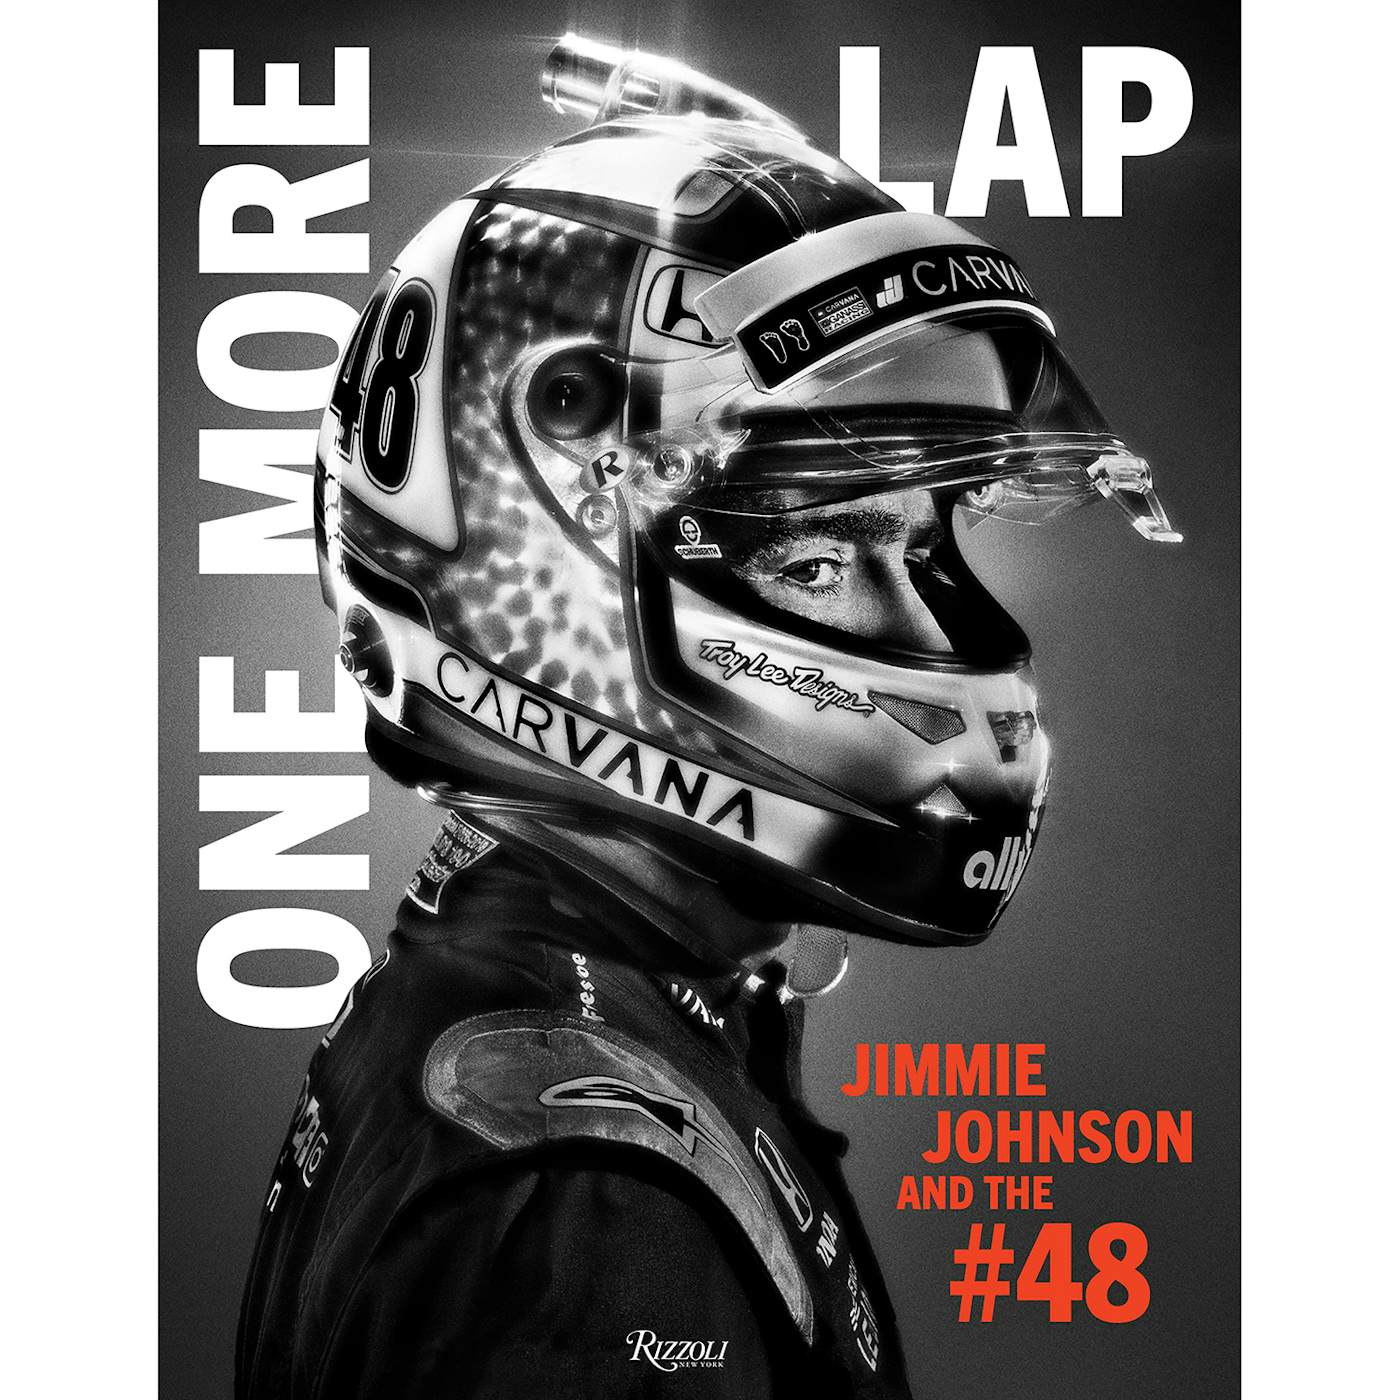 One More Lap - by Jimmie Johnson & Ivan Shaw Hardcover Book